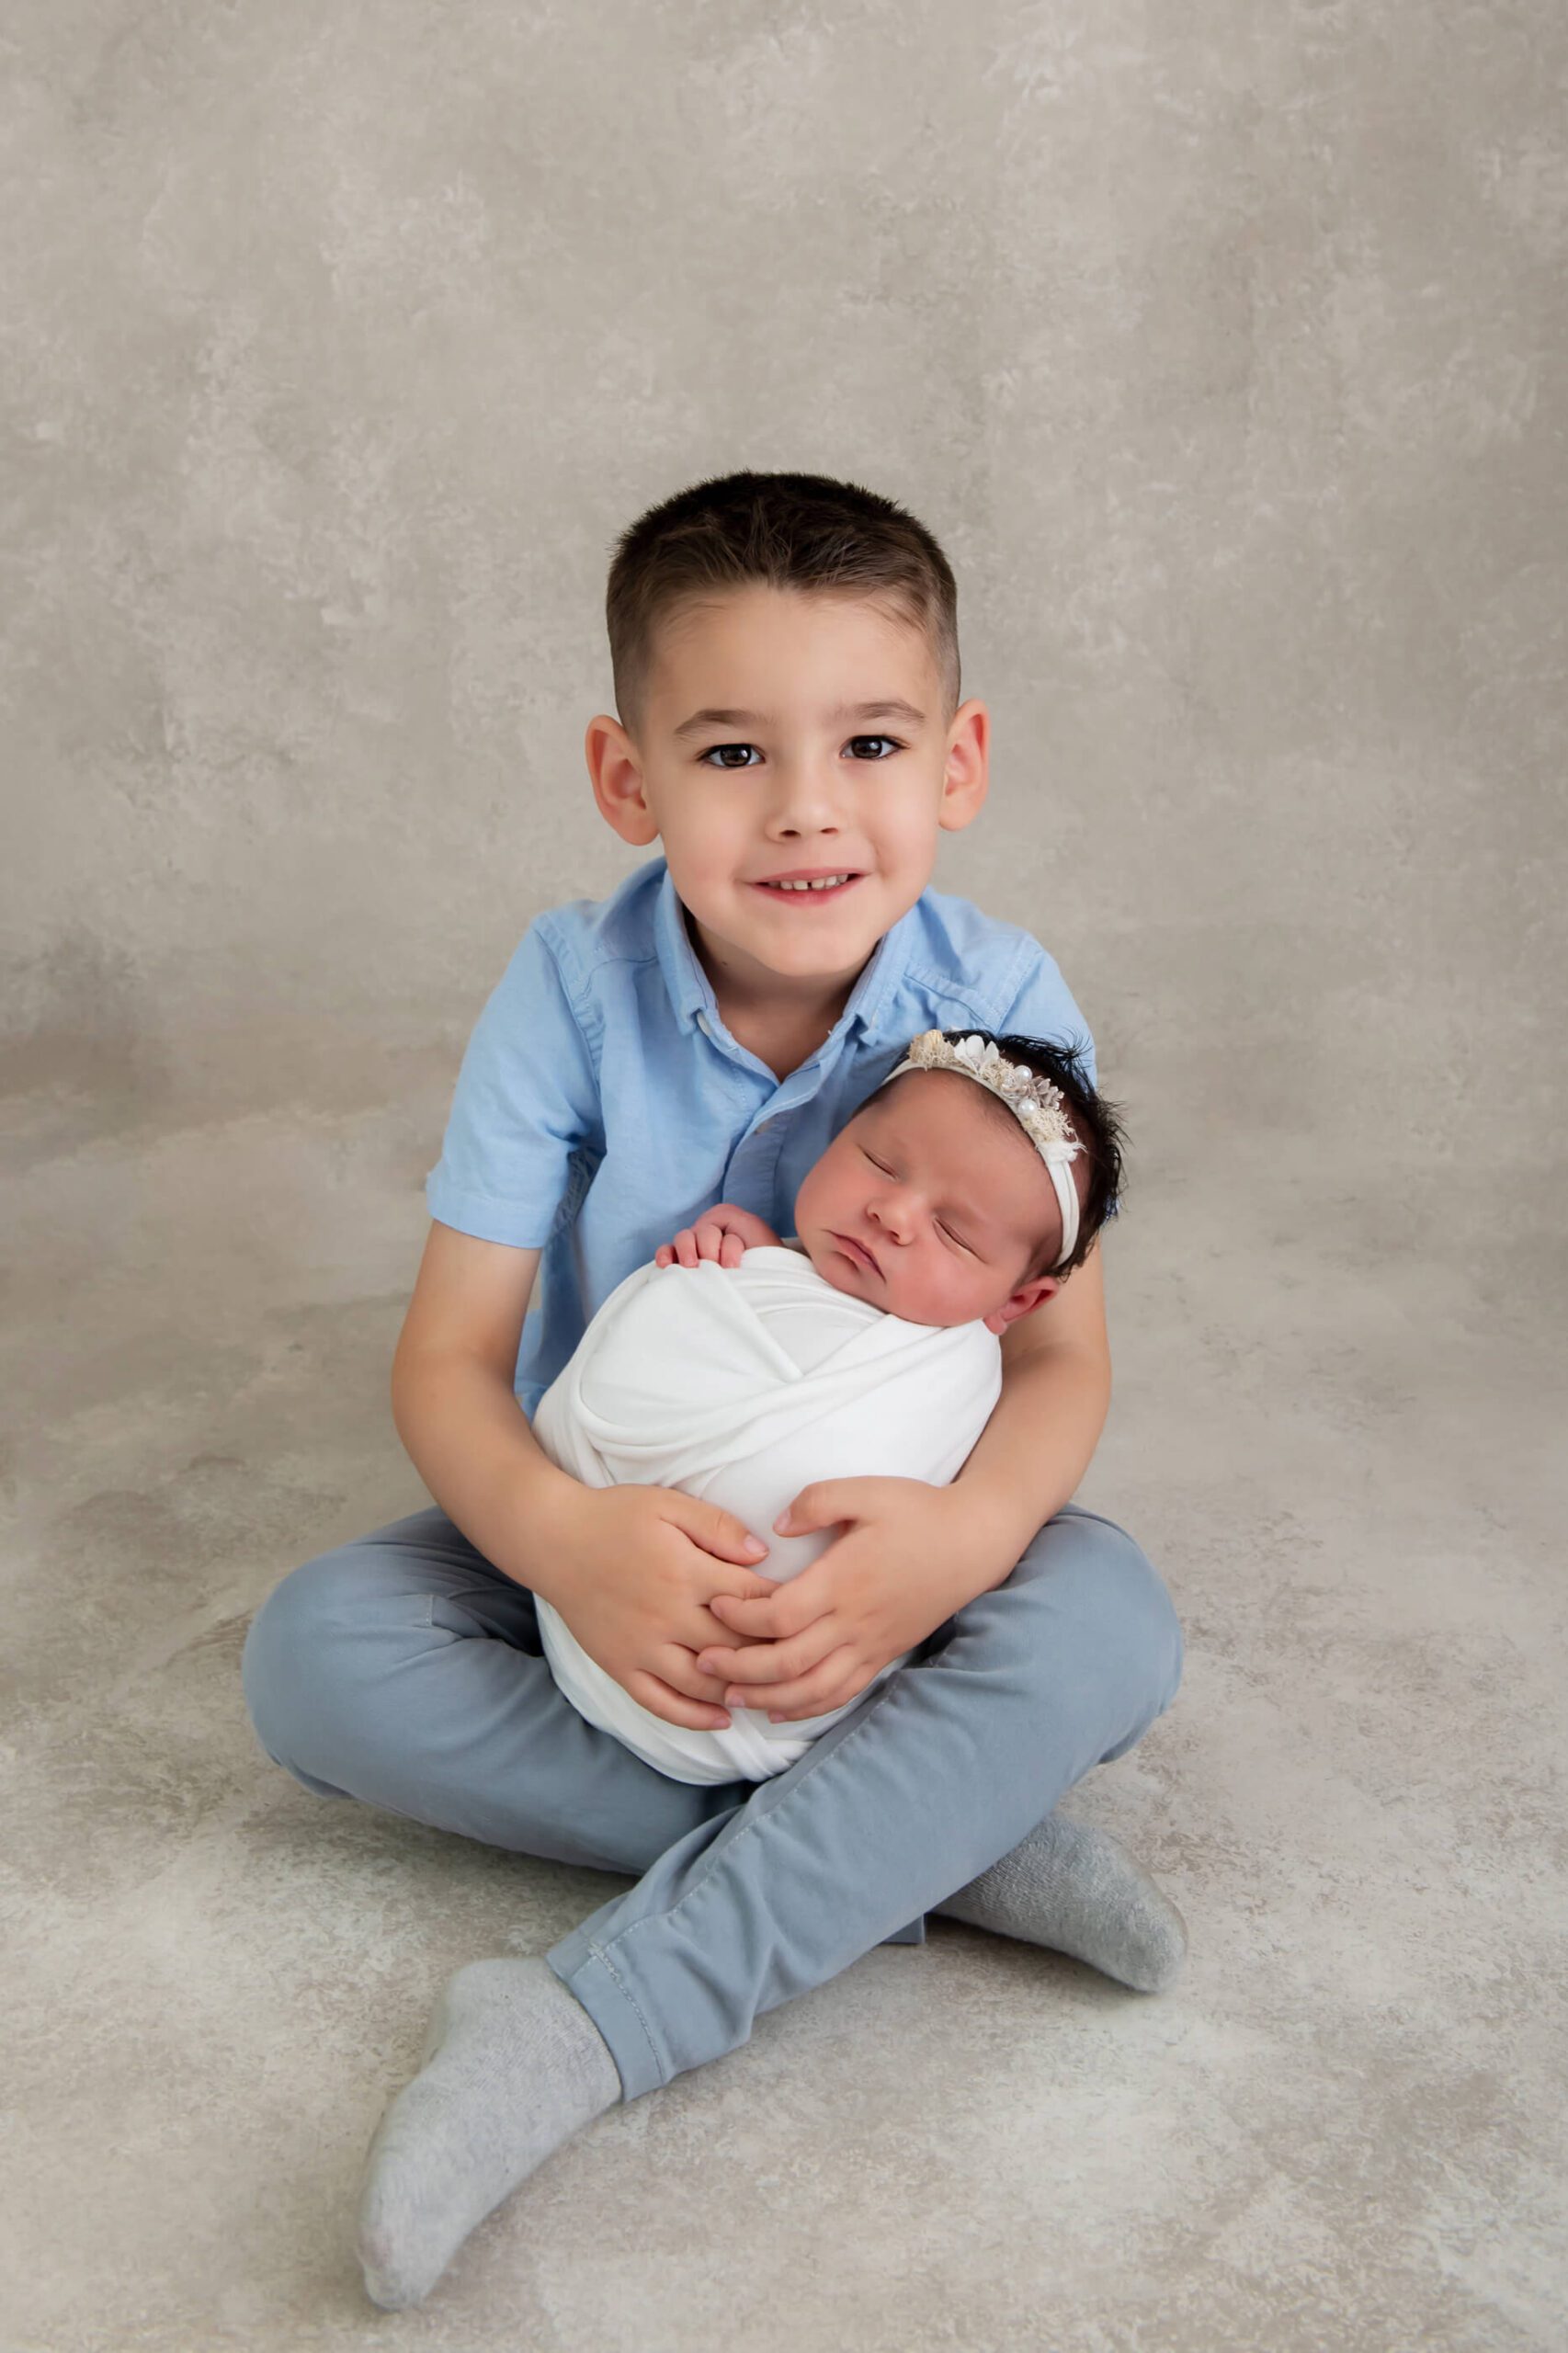 sibling brother with newborn sister